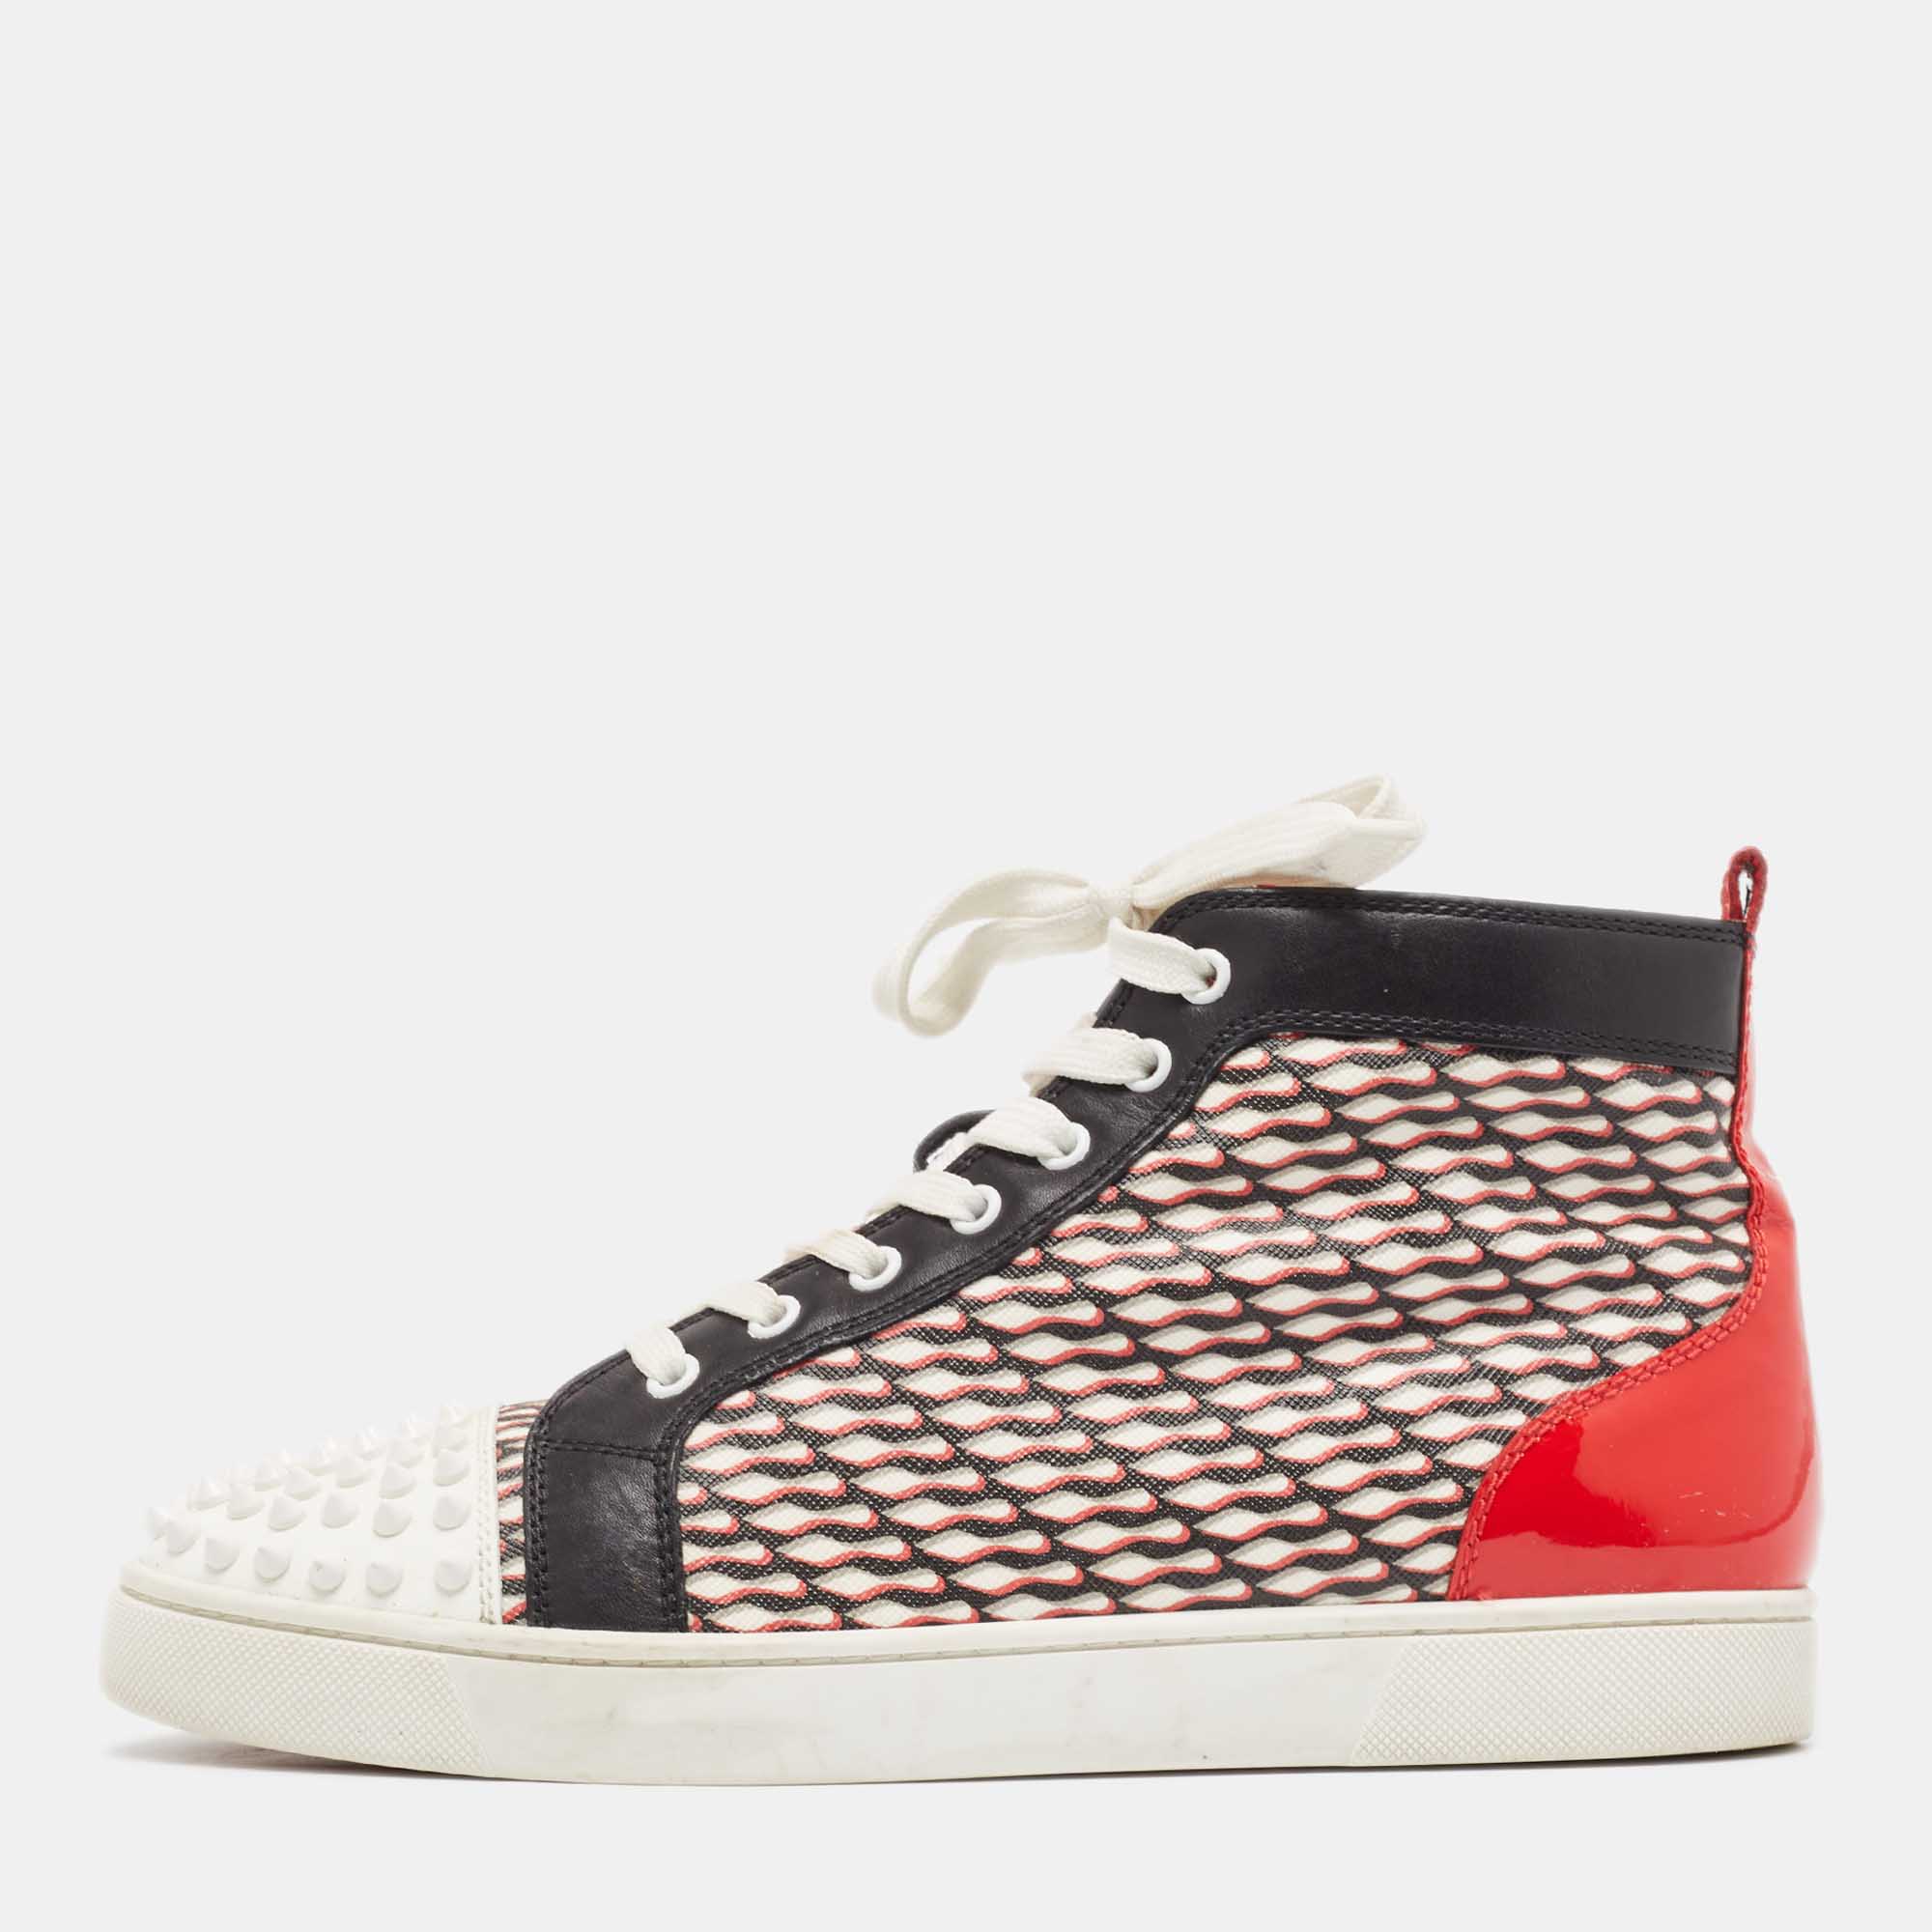 Christian louboutin patent leather and canvas lou  spikes orlato high top sneakers size 42.5